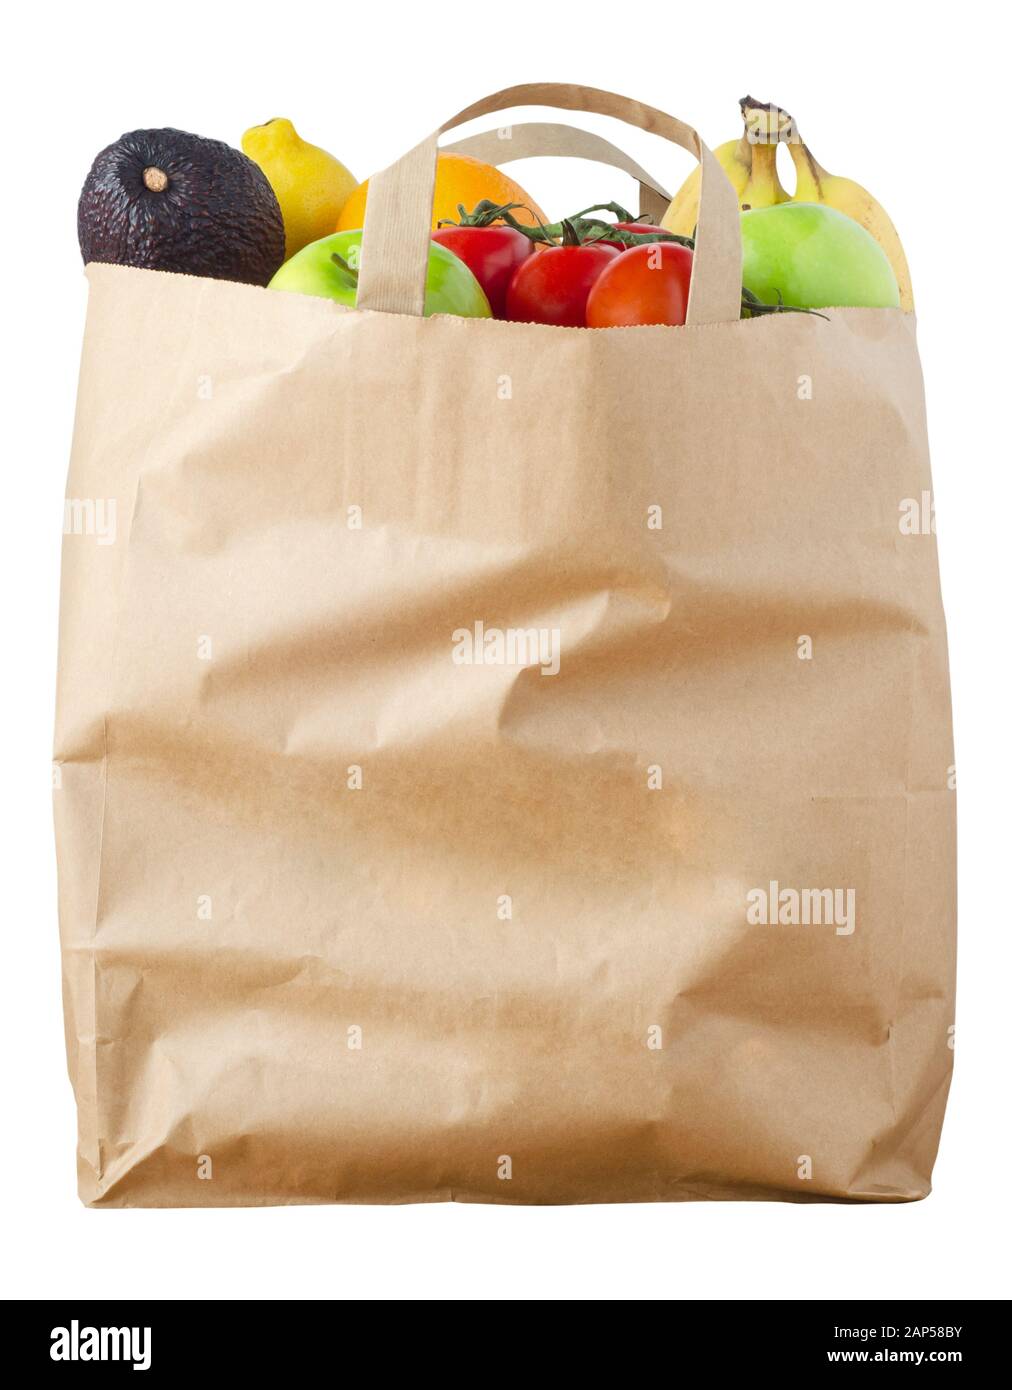 A brown paper shopping bag, filled to the top with varieties of fruit, cut out and isolated on a white background. Stock Photo